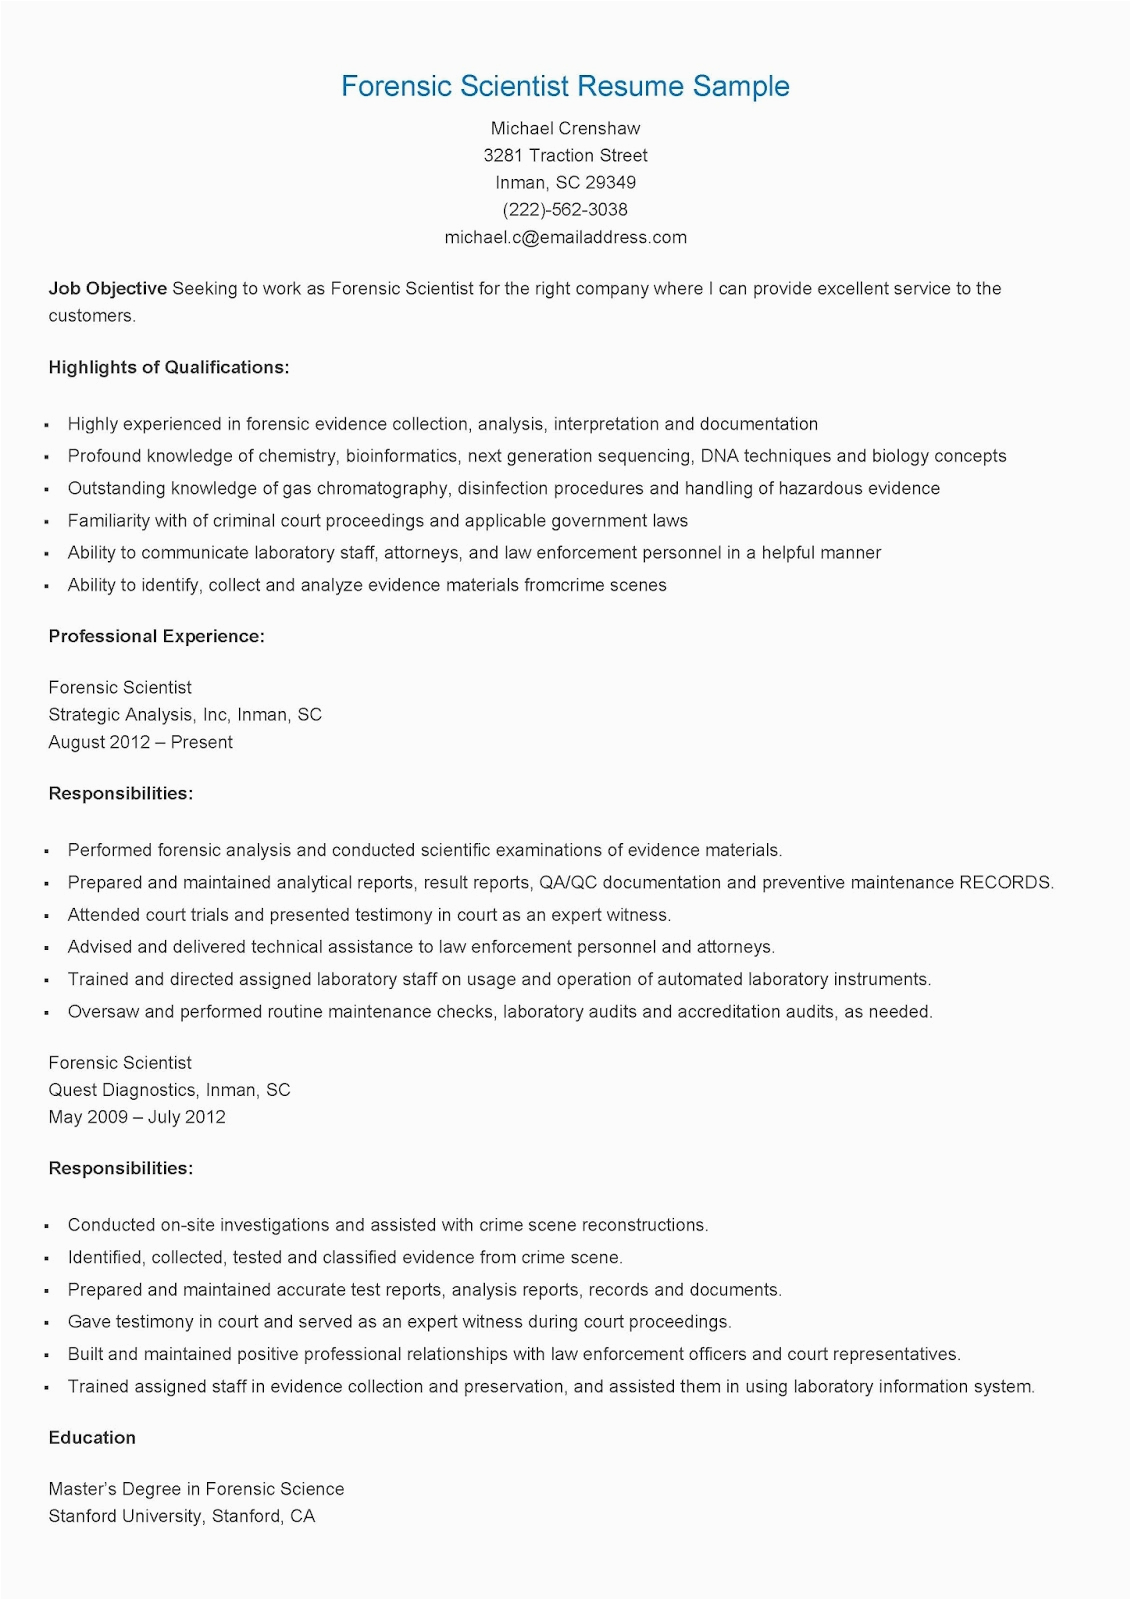 Sample Resume for forensic Science Technician Resume Samples forensic Scientist Resume Sample